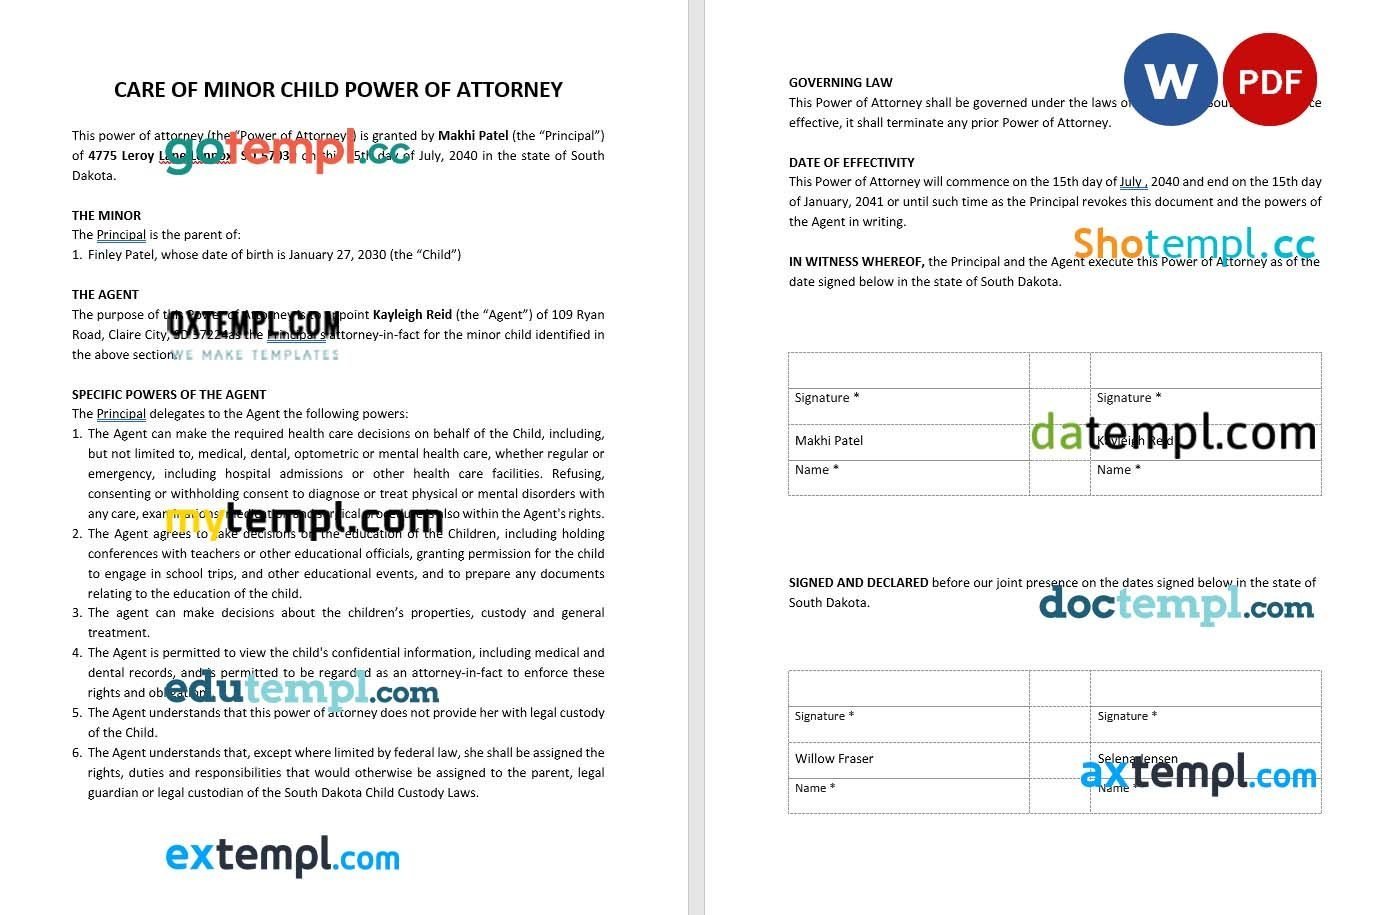 Care of Minor Child Power of Attorney Template, fully editable